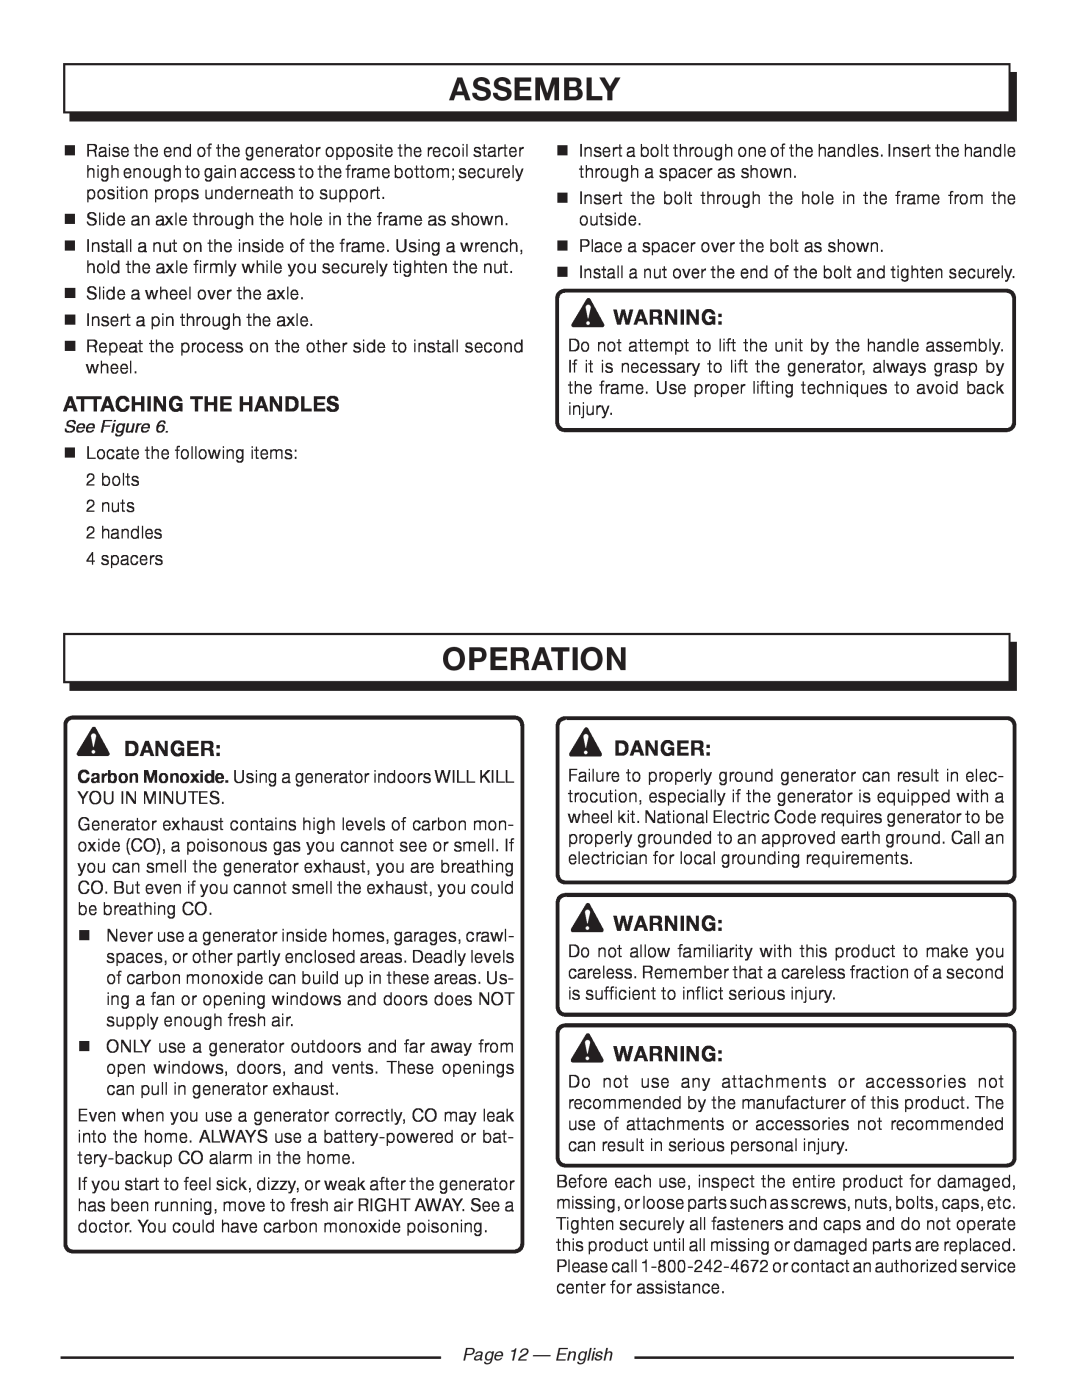 Homelite HG5000 Assembly, operation, attaching the handles, DANGER danger, See Figure, Page 12 — English 